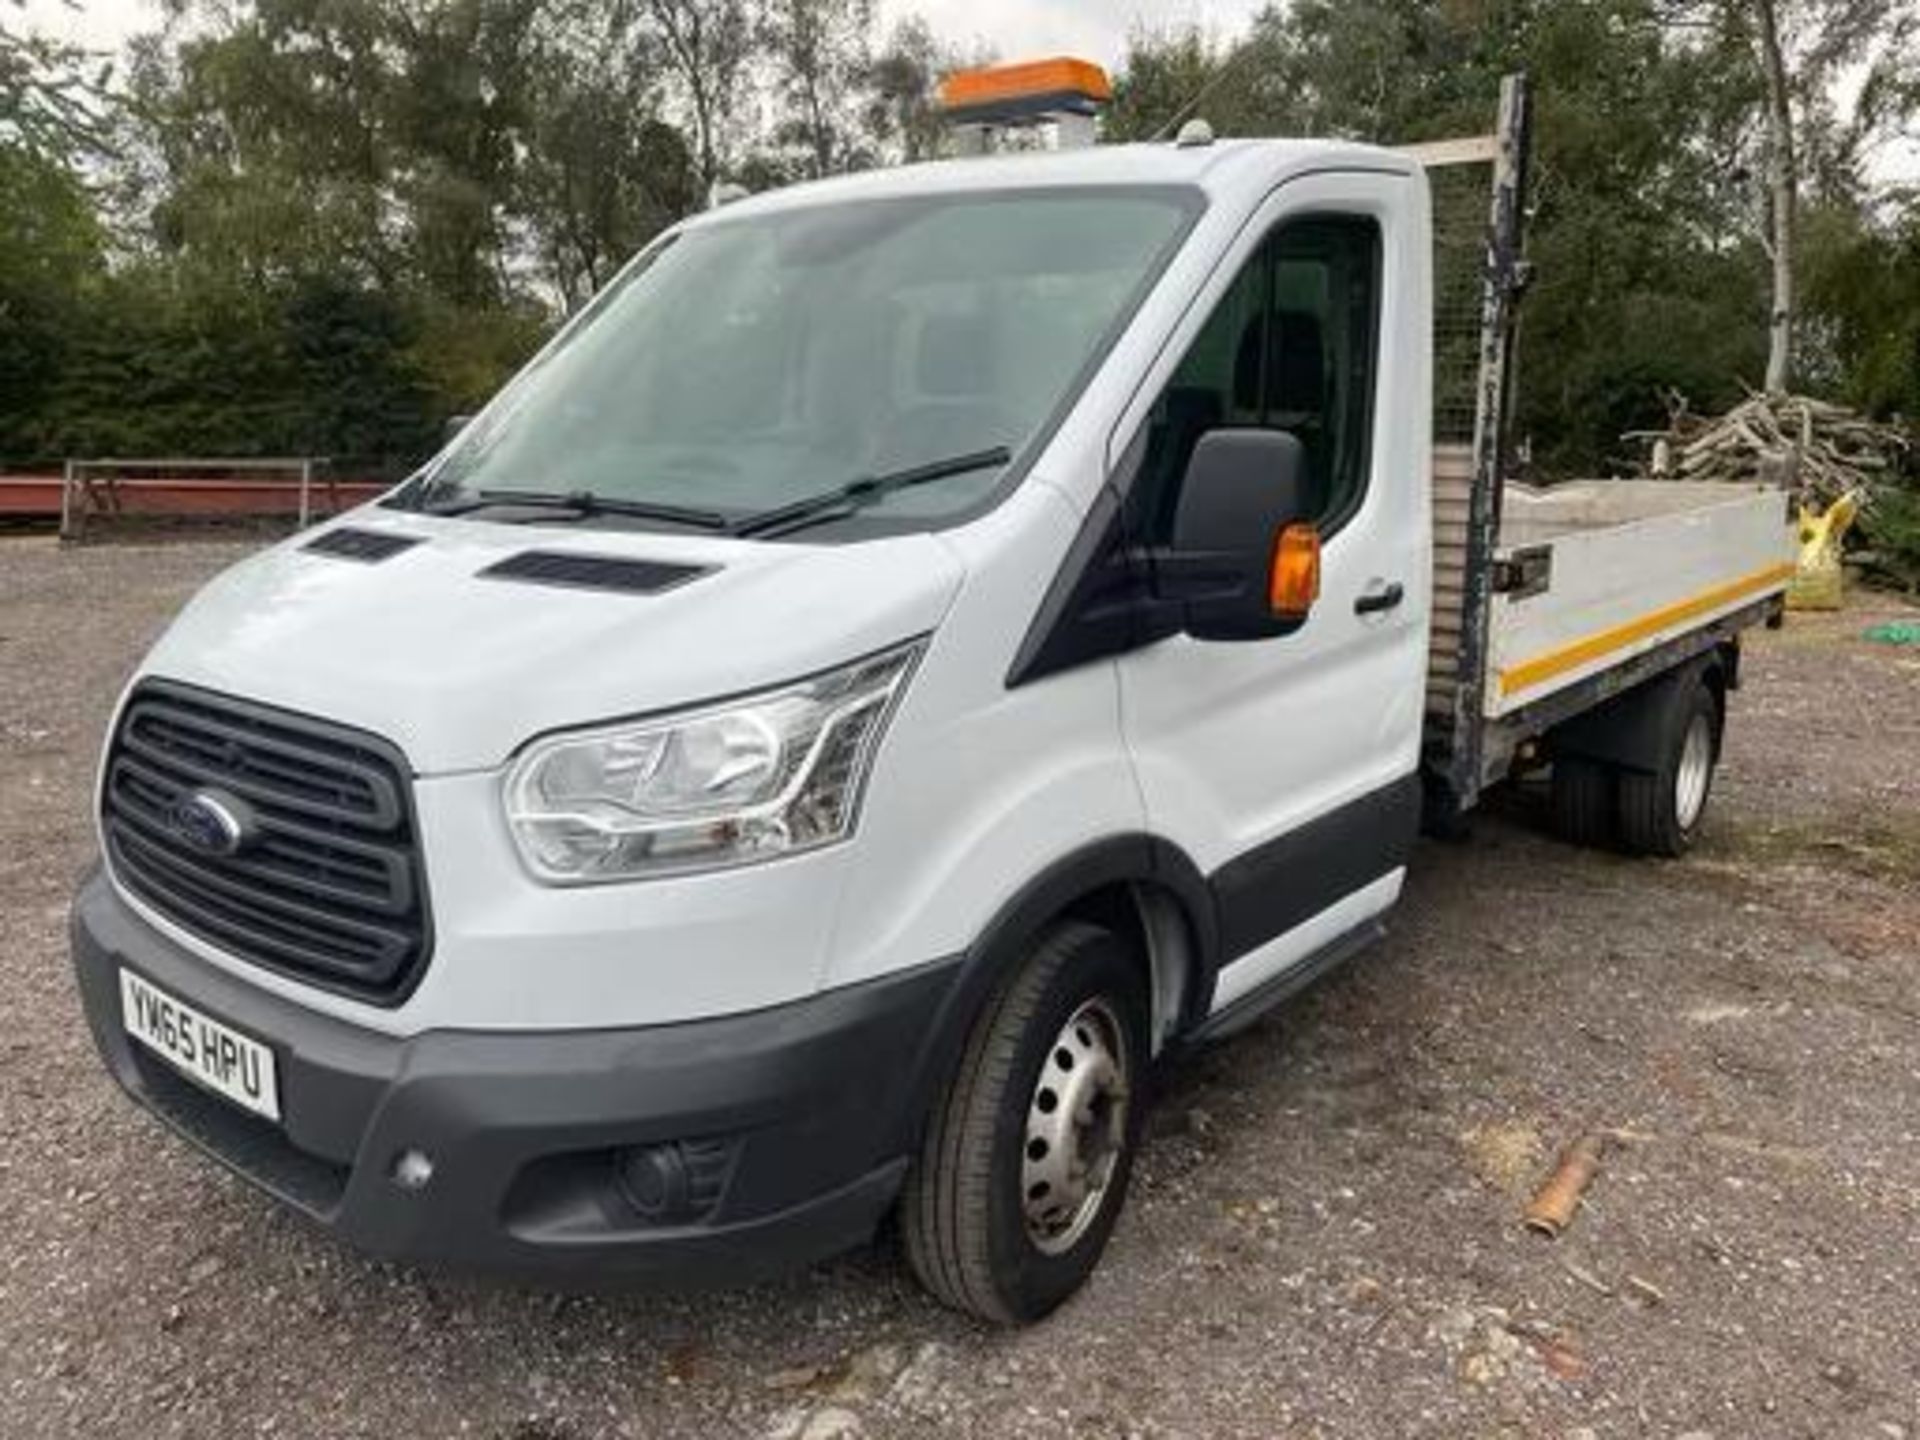 2015/65 FORD TRANSIT 350 TIPPER, 130K MILES, SHOWING 1 PREVIOUS KEEPERS, 2.2 DIESEL *PLUS VAT* - Image 3 of 9